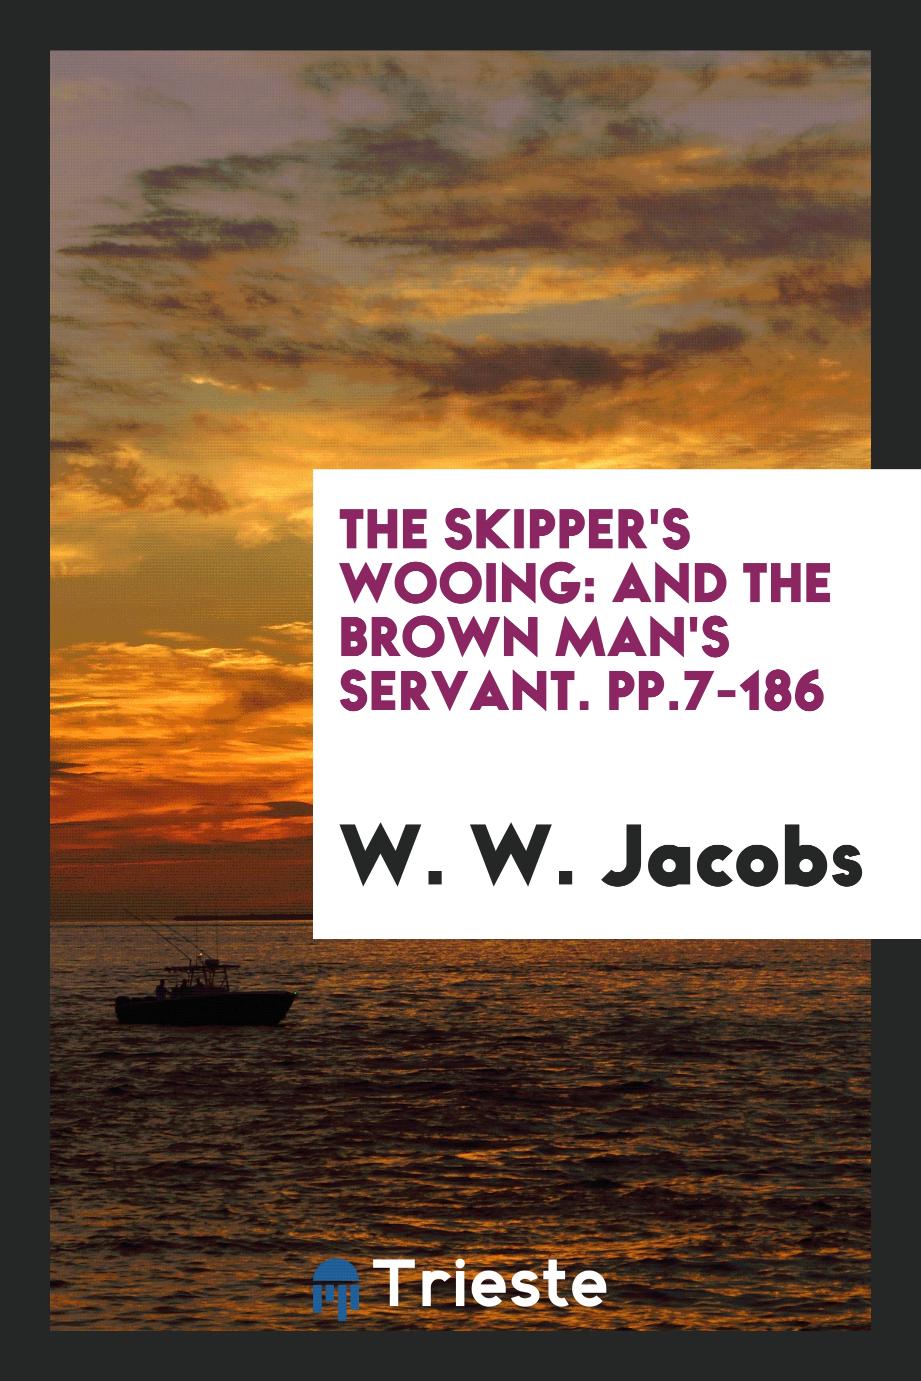 The Skipper's Wooing: And The Brown Man's Servant. pp.7-186